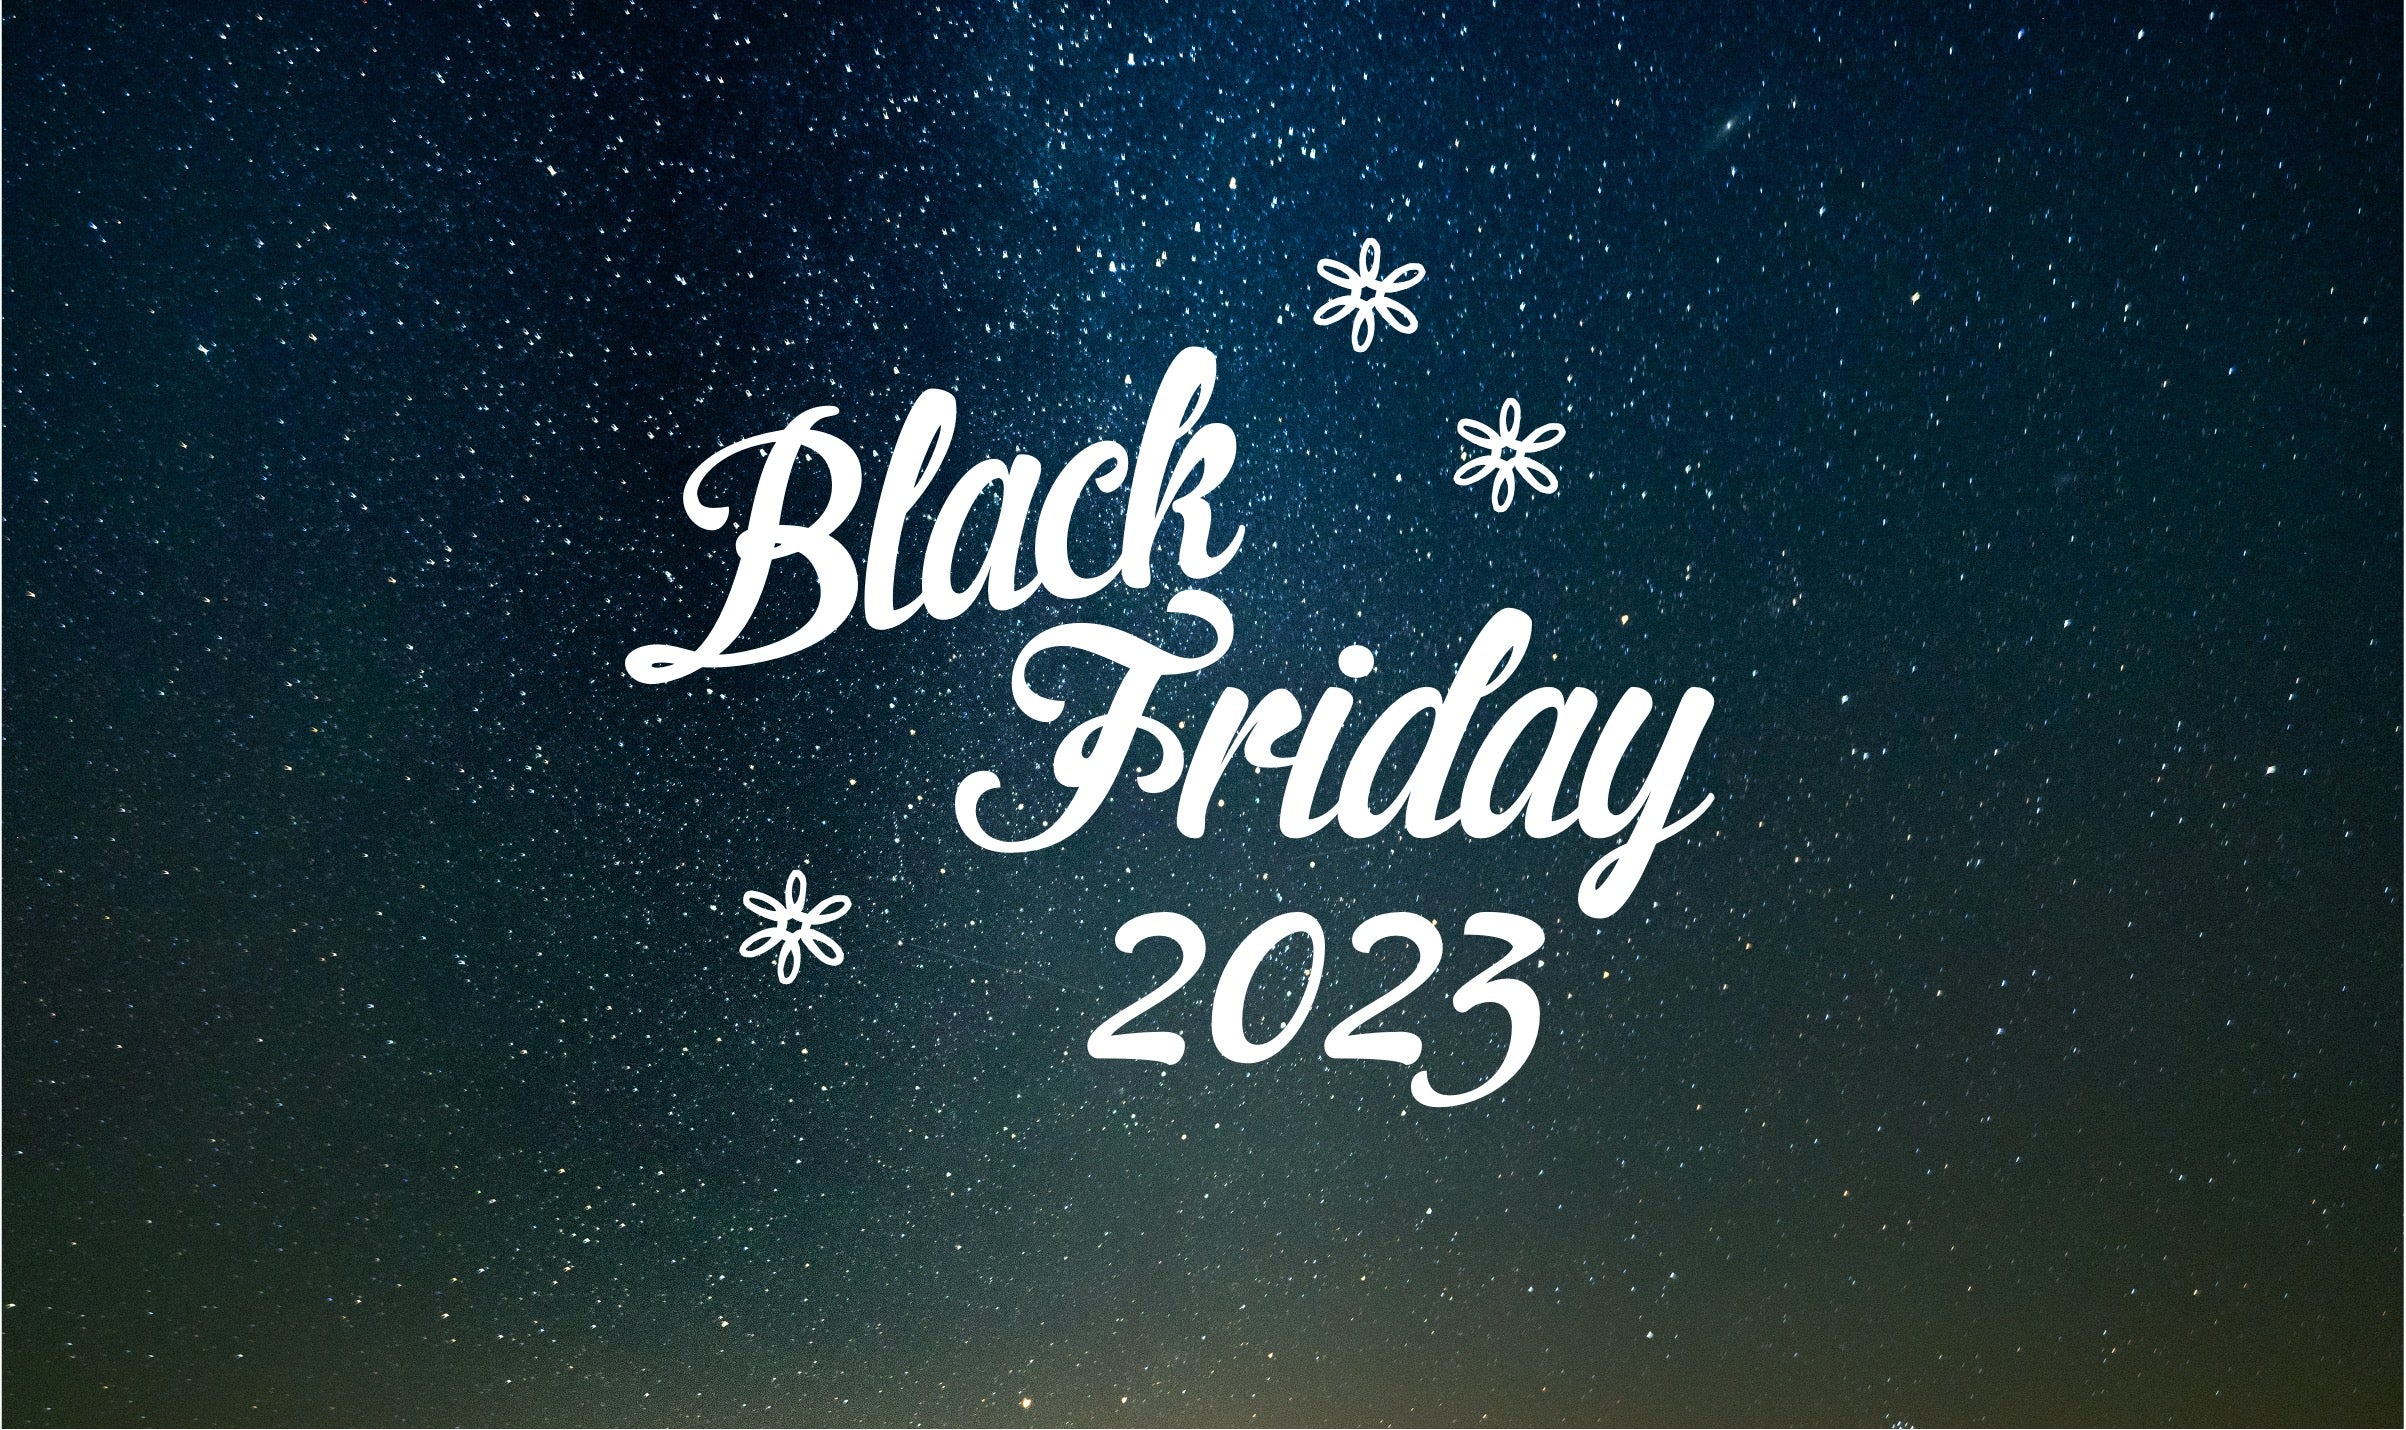 Black Friday and Cyber Week 2023!